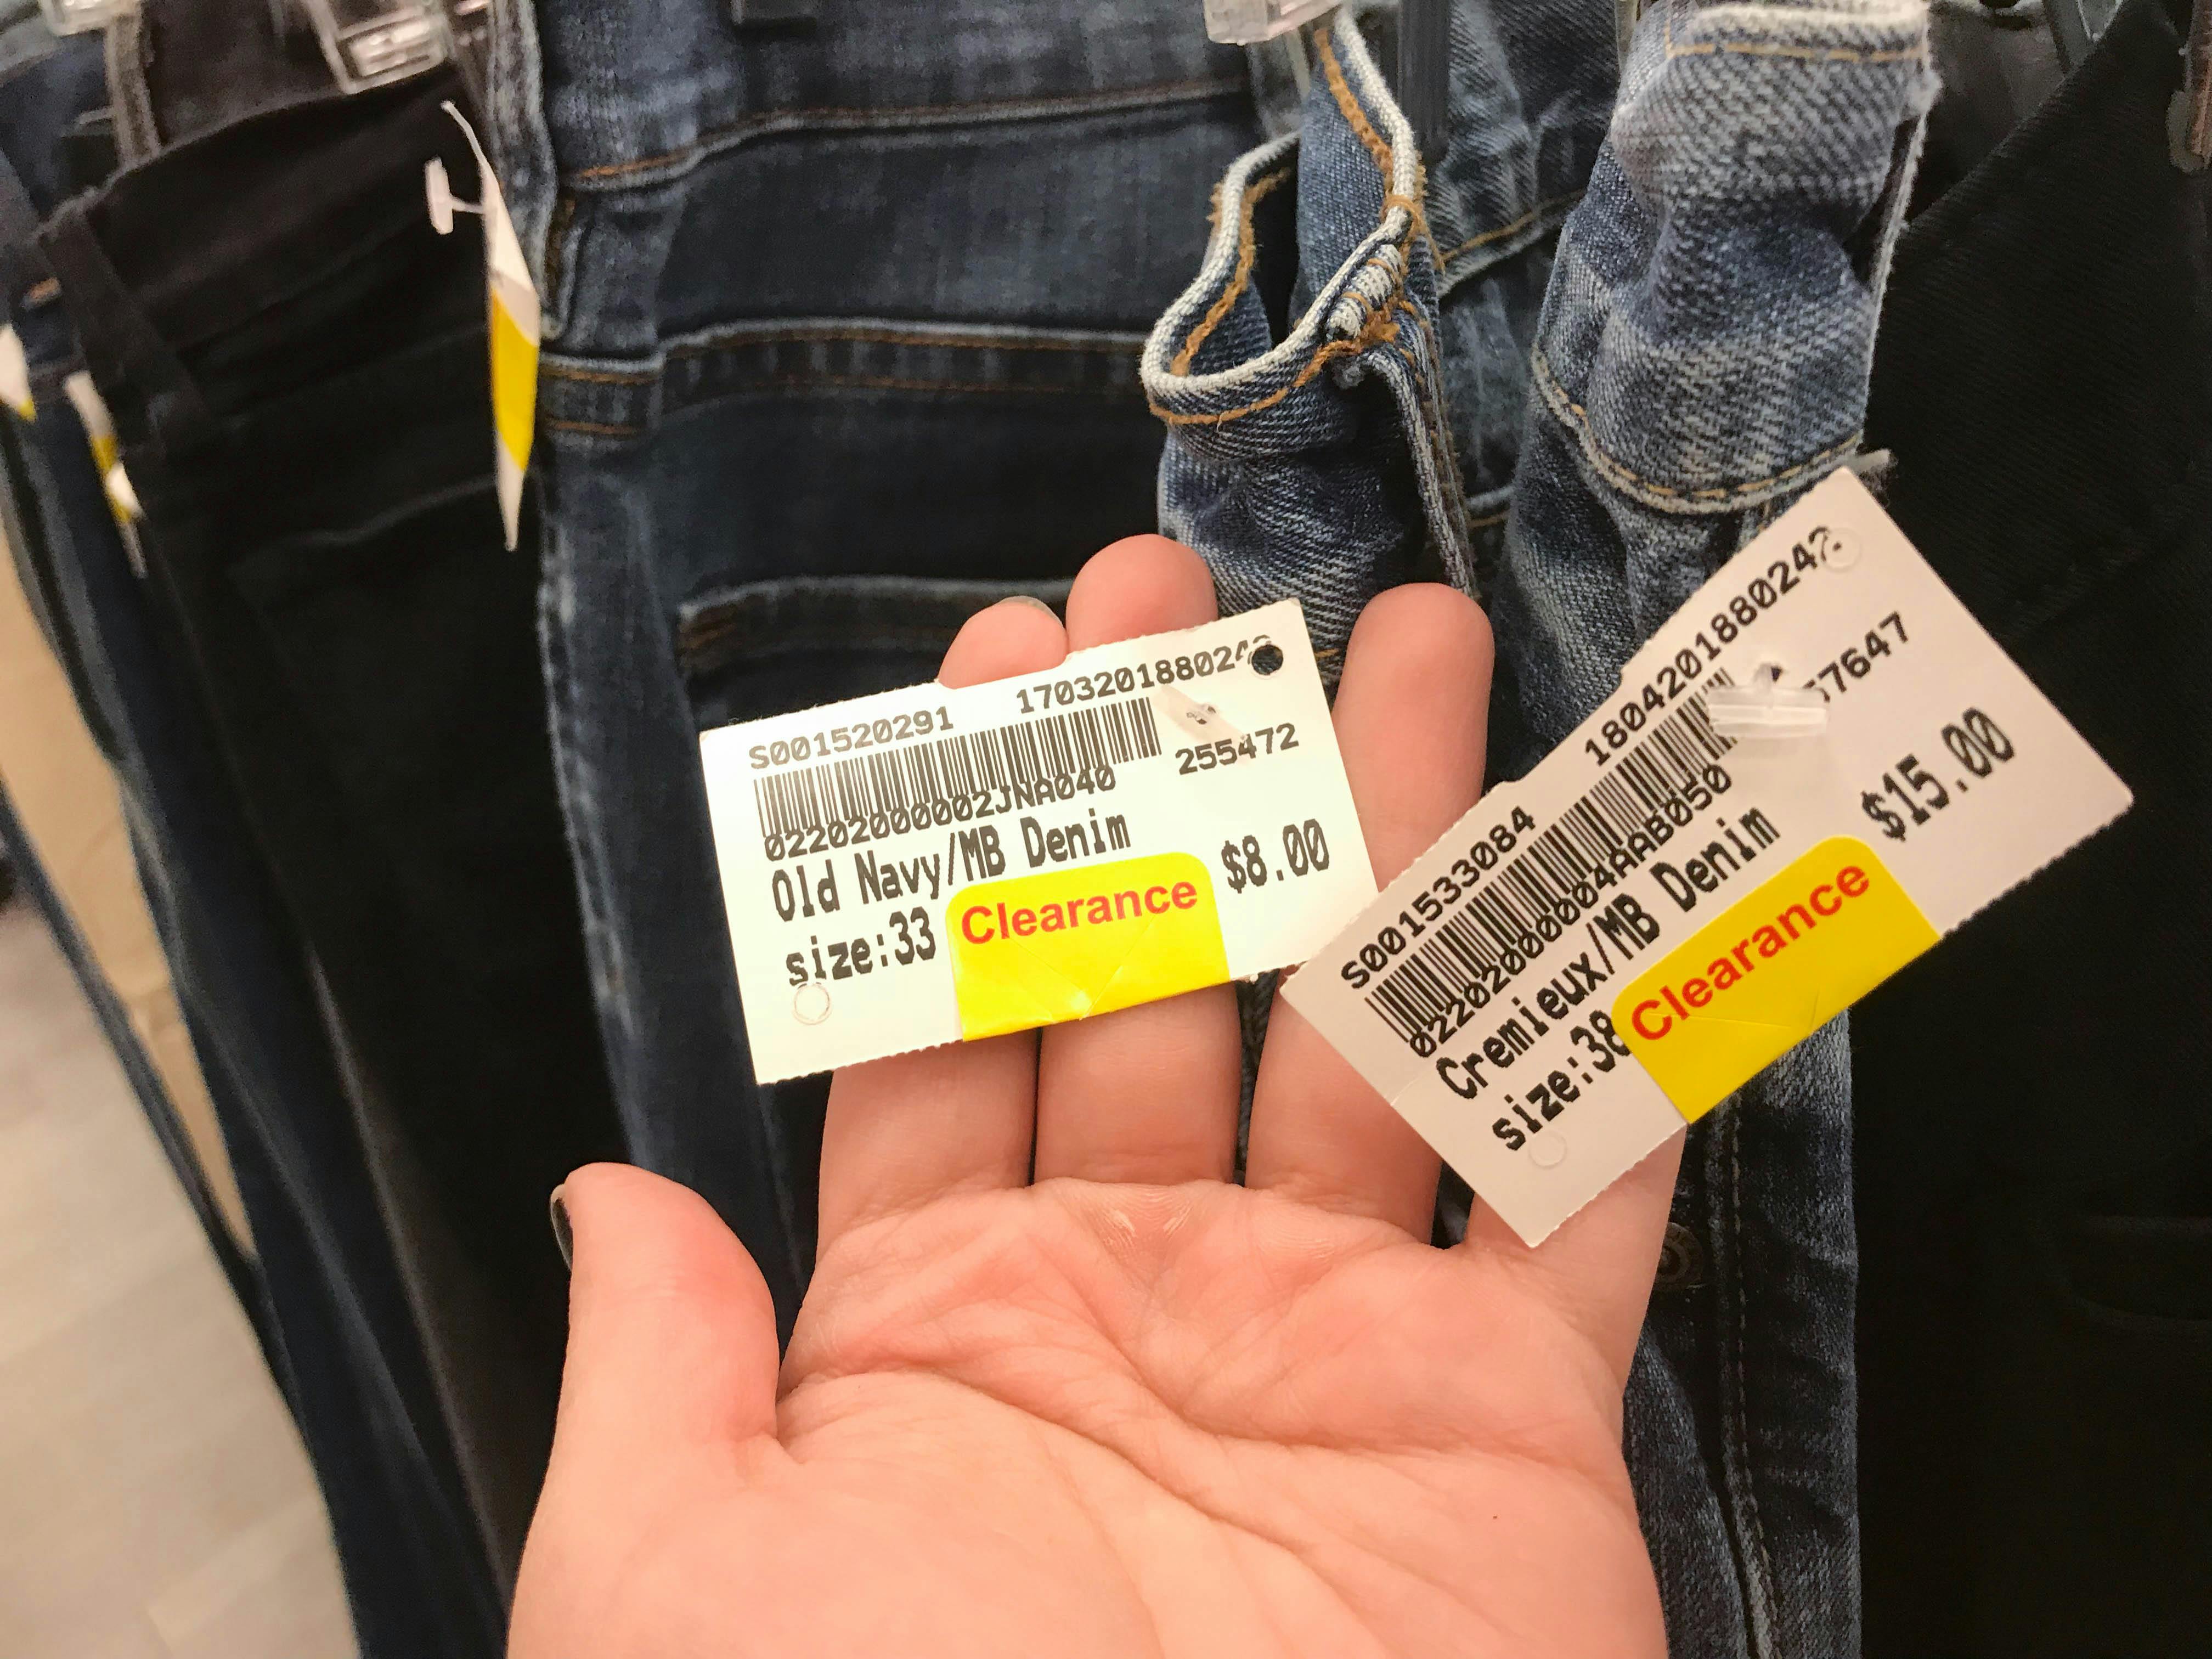 How Much Does Plato's Closet Pay for Clothes? And Other Hot Savings